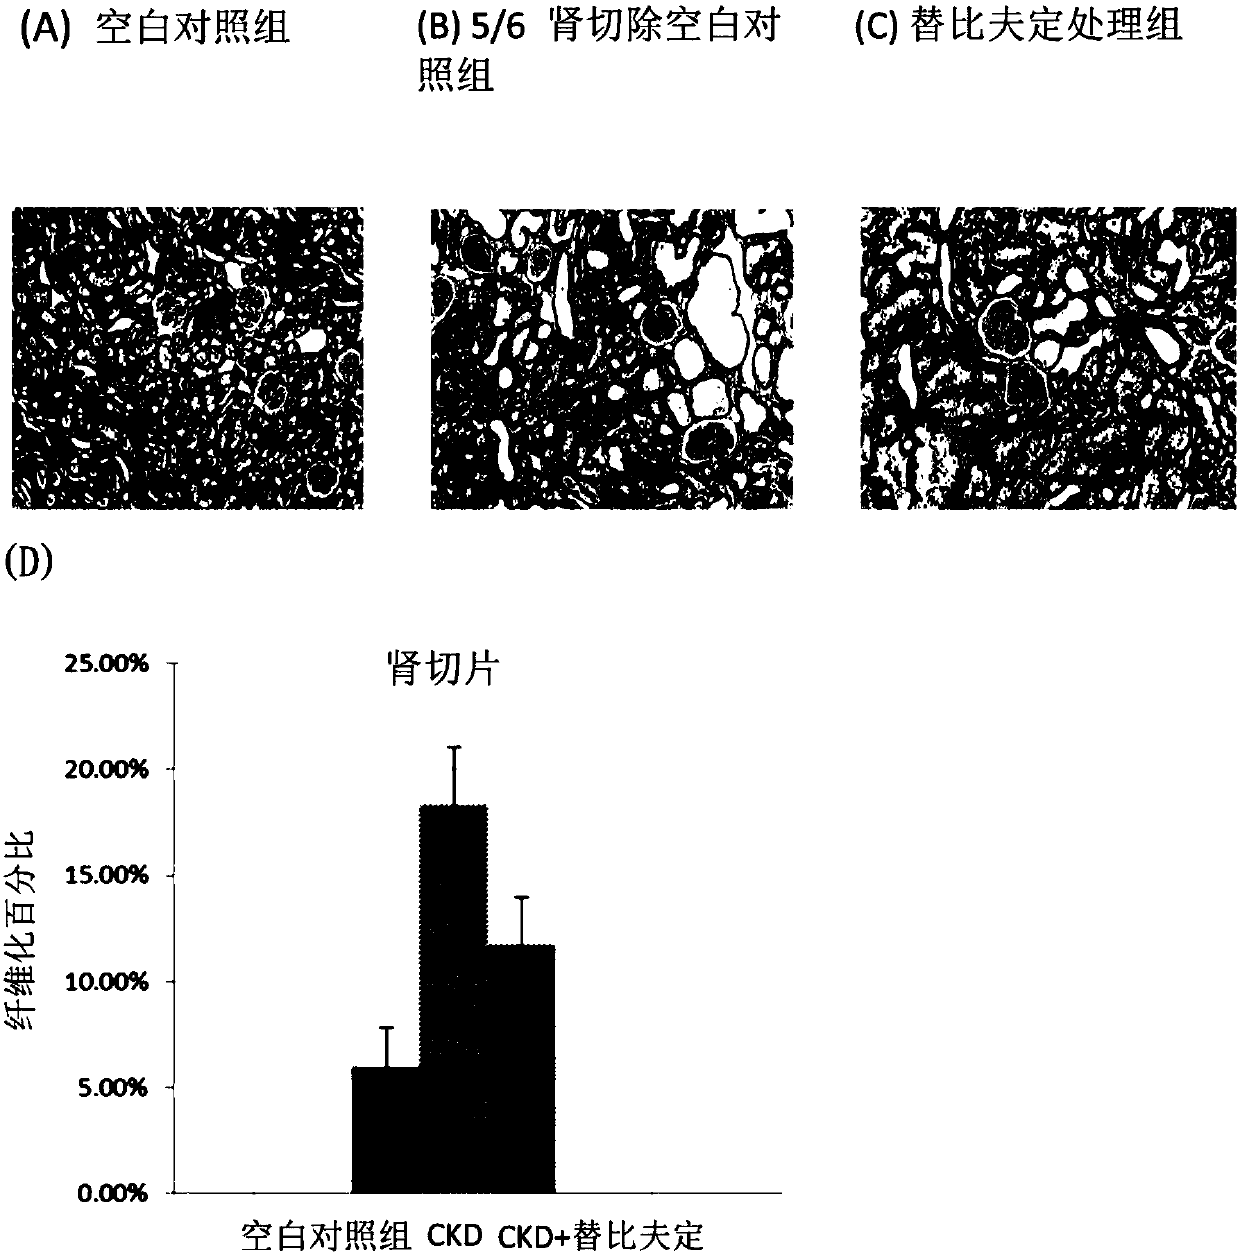 Method For Improving Kidney And/Or Heart Function In Patients With Kidney Disease